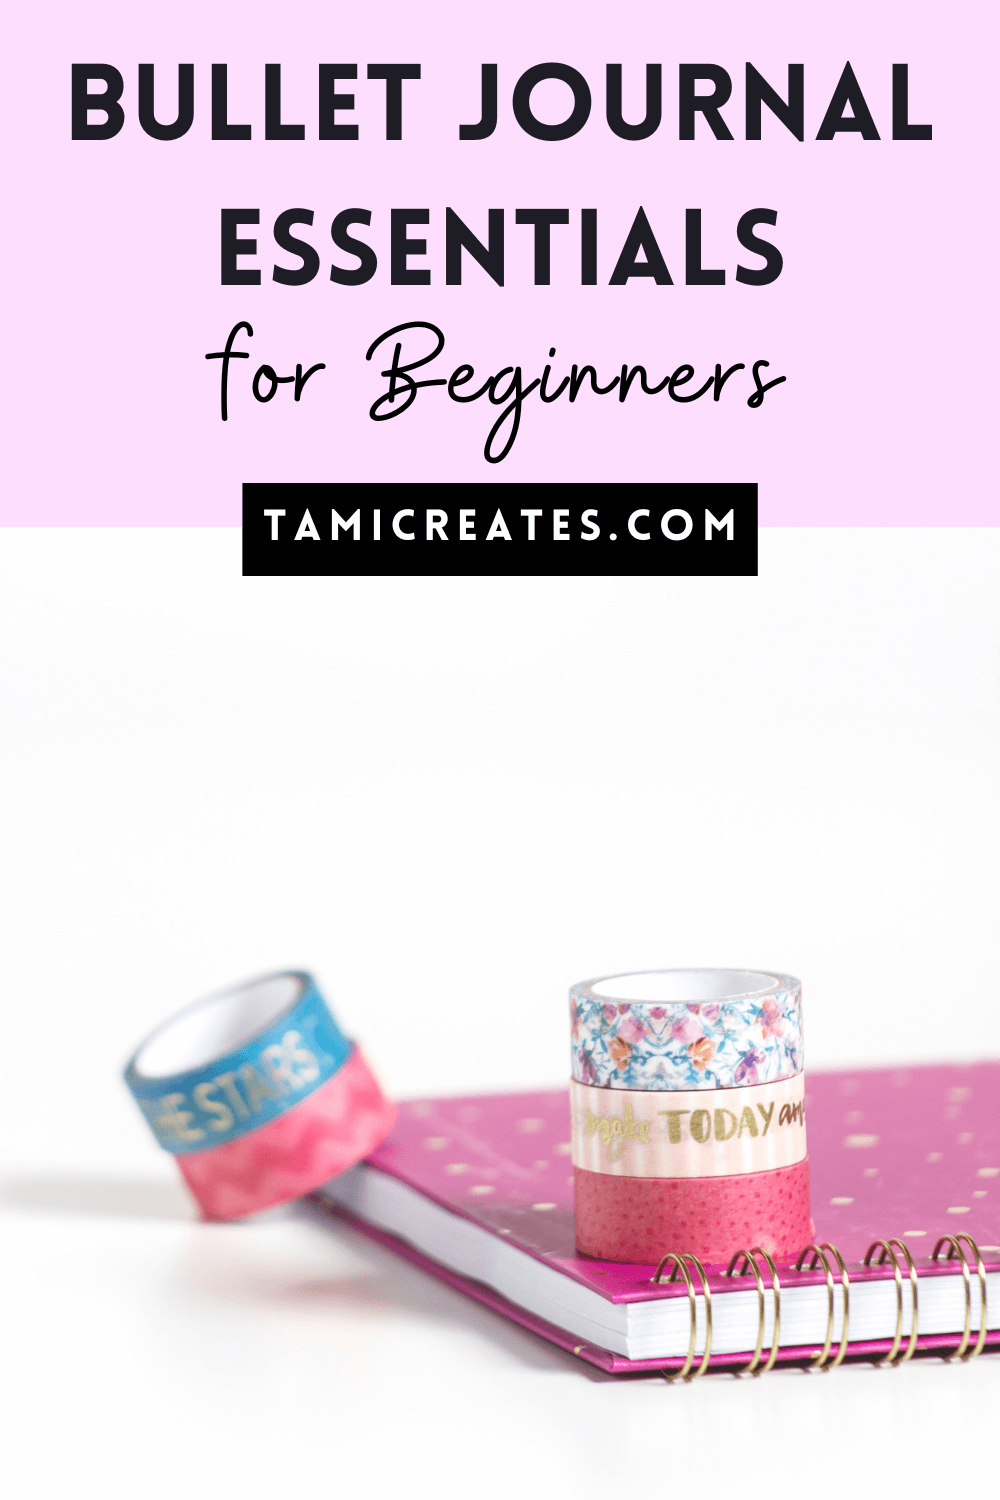 It's easy to get caught up in seeing fancy bullet journal spreads and seeing expensive supplies. But you actually don't need a ton of stuff to get started bullet journaling. Here are my favorite affordable bullet journal essentials for beginners!